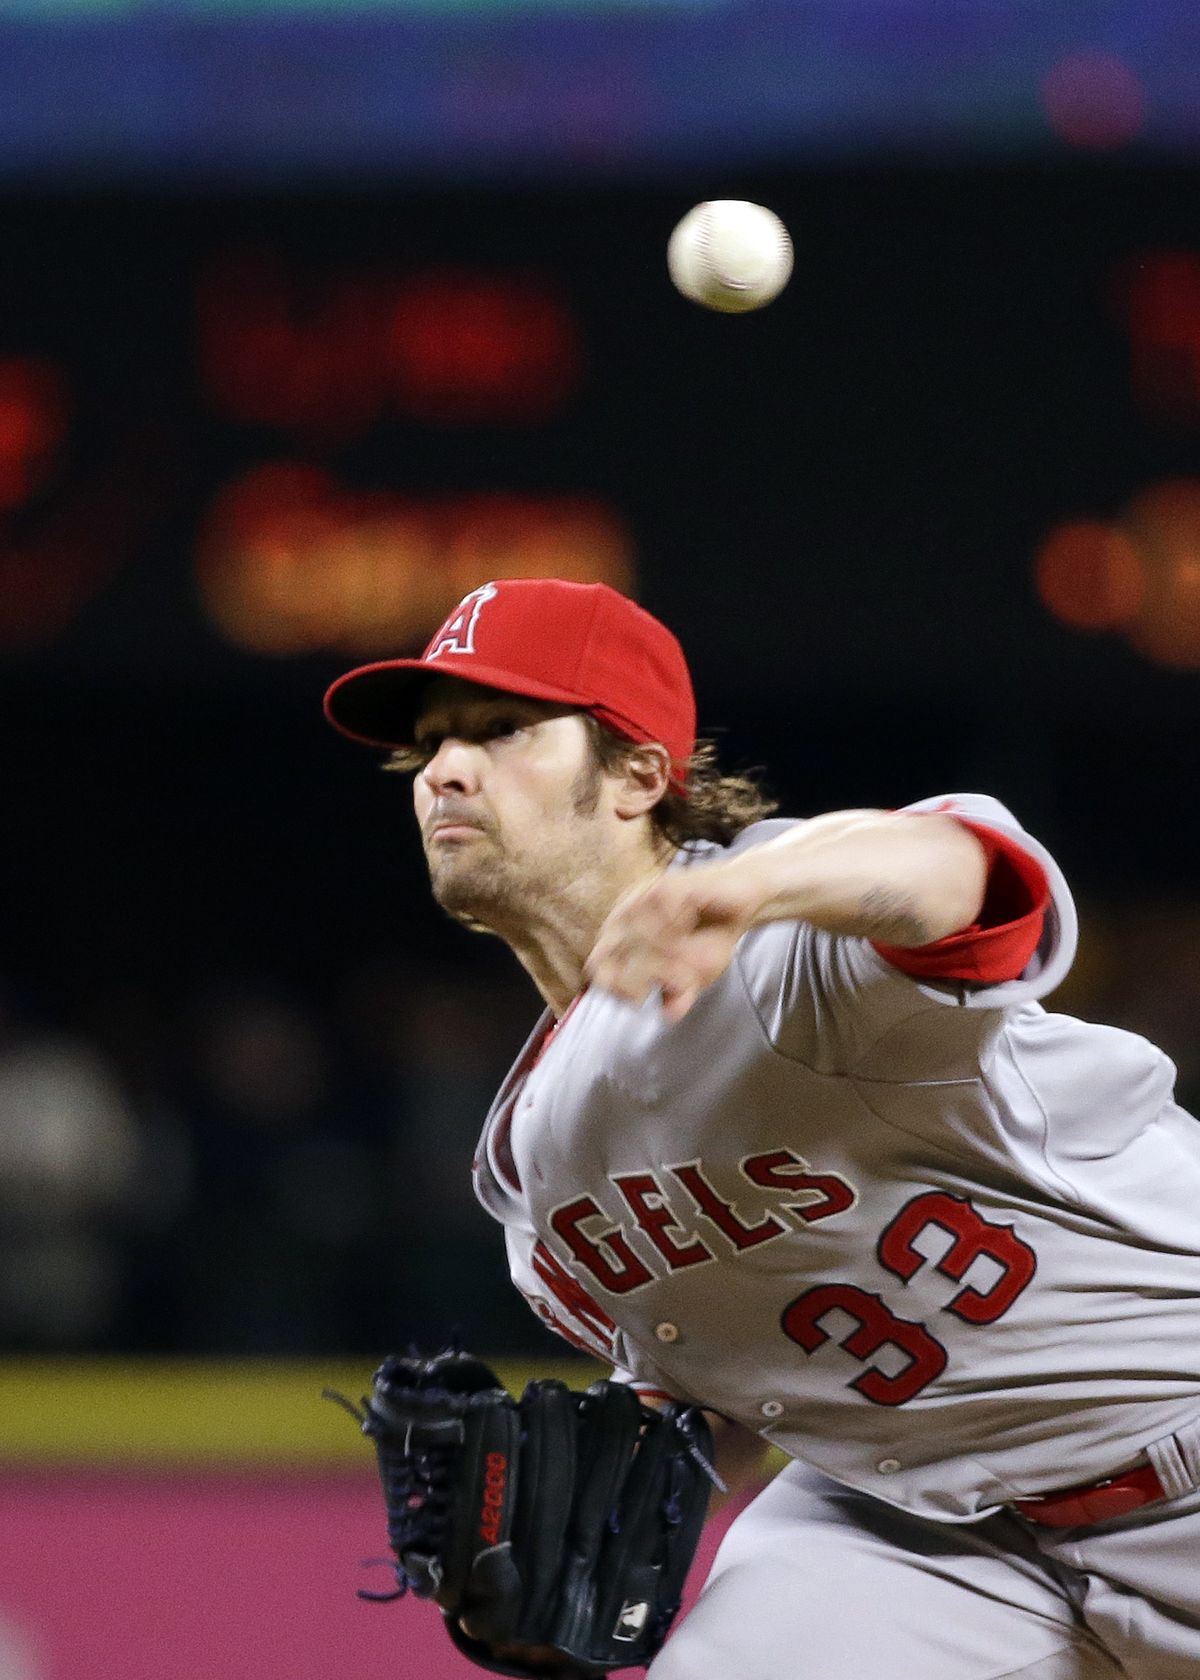 Angels starting pitcher C.J. Wilson held Mariners to two singles in 8 innings. (Associated Press)